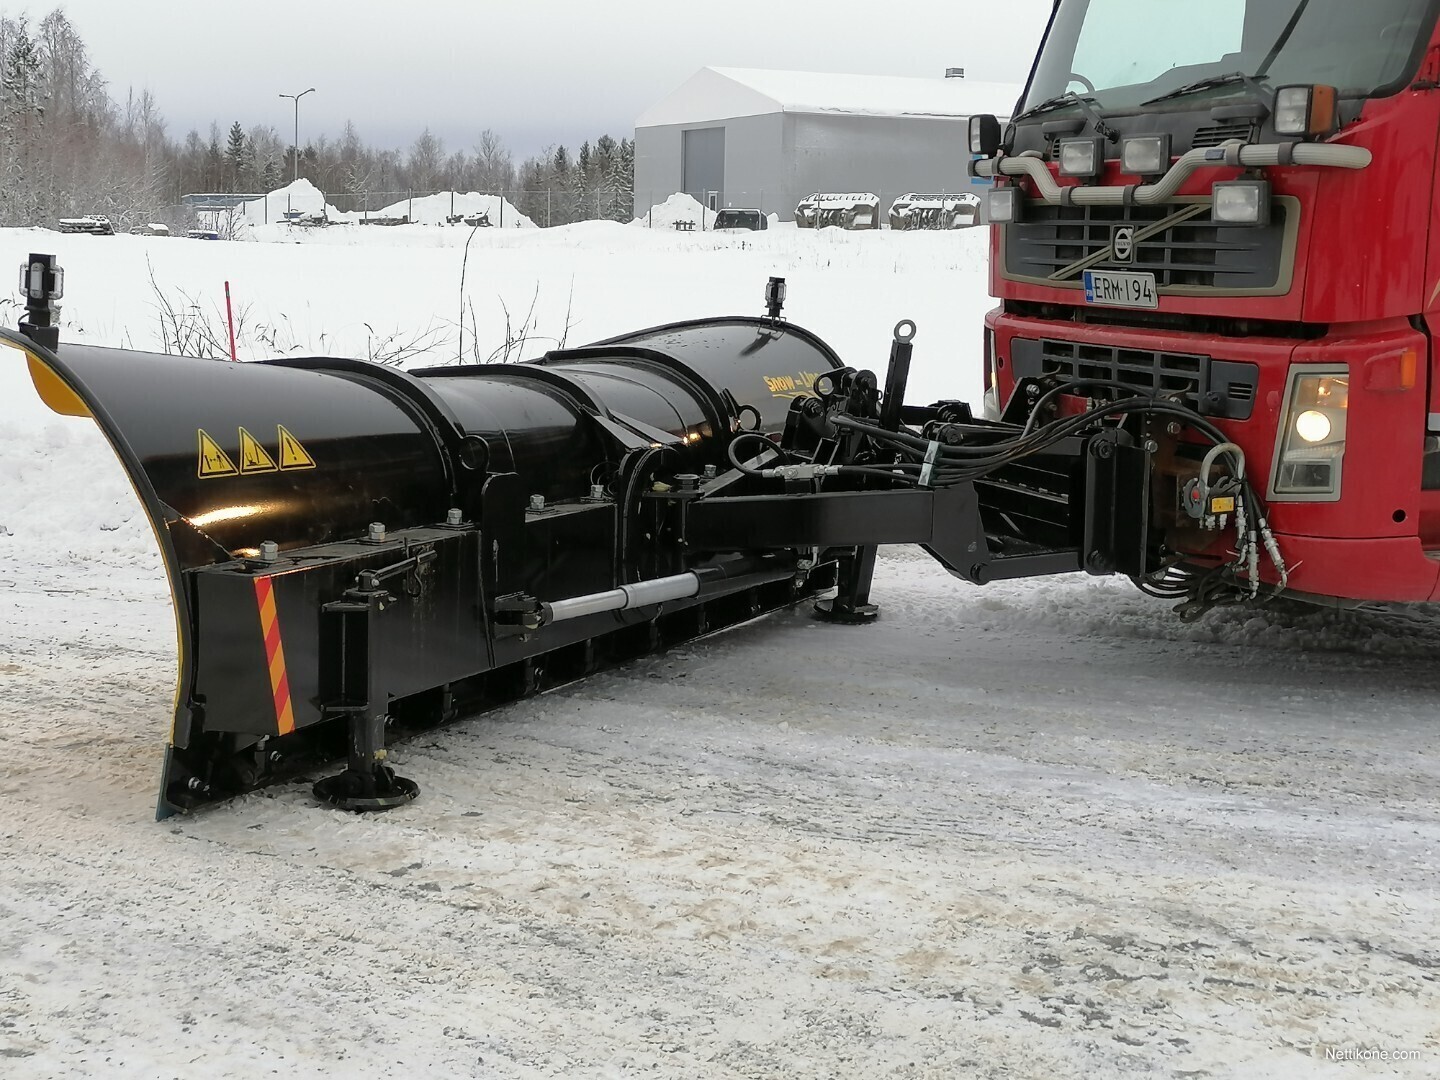 Snow-Line products are painted with Nor-Maali's Normafine HS